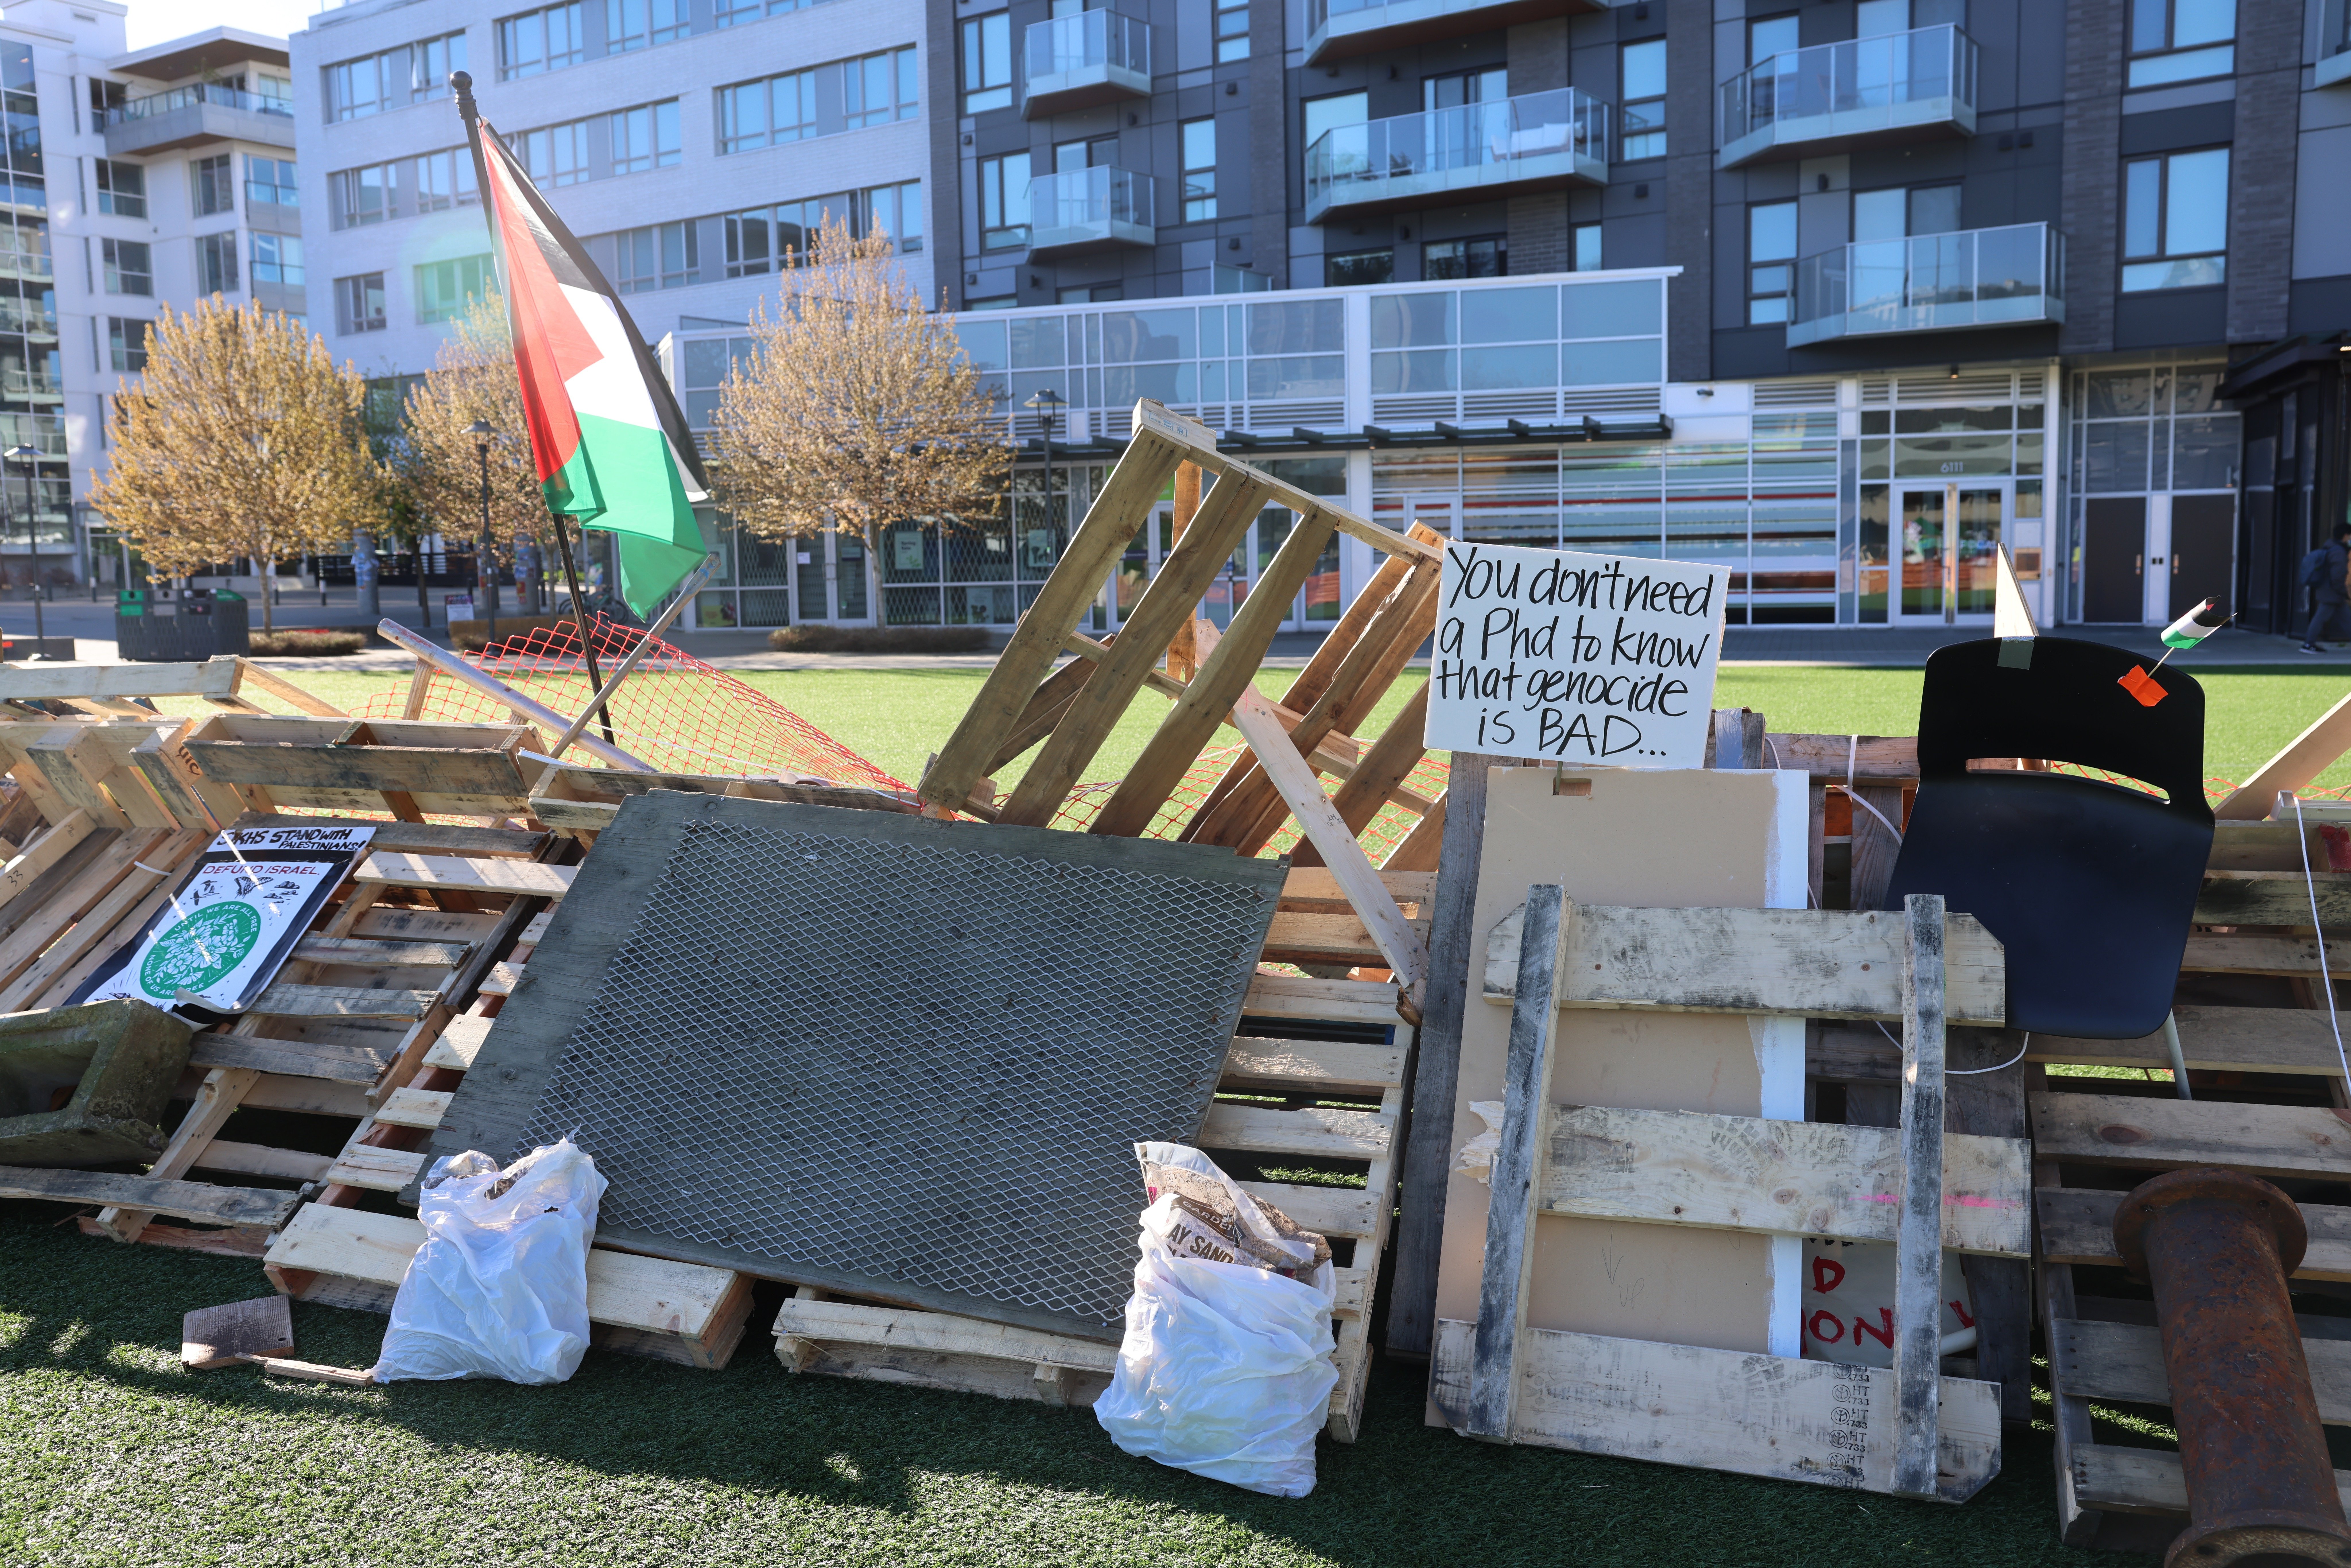 One side of the encampment's barricade.